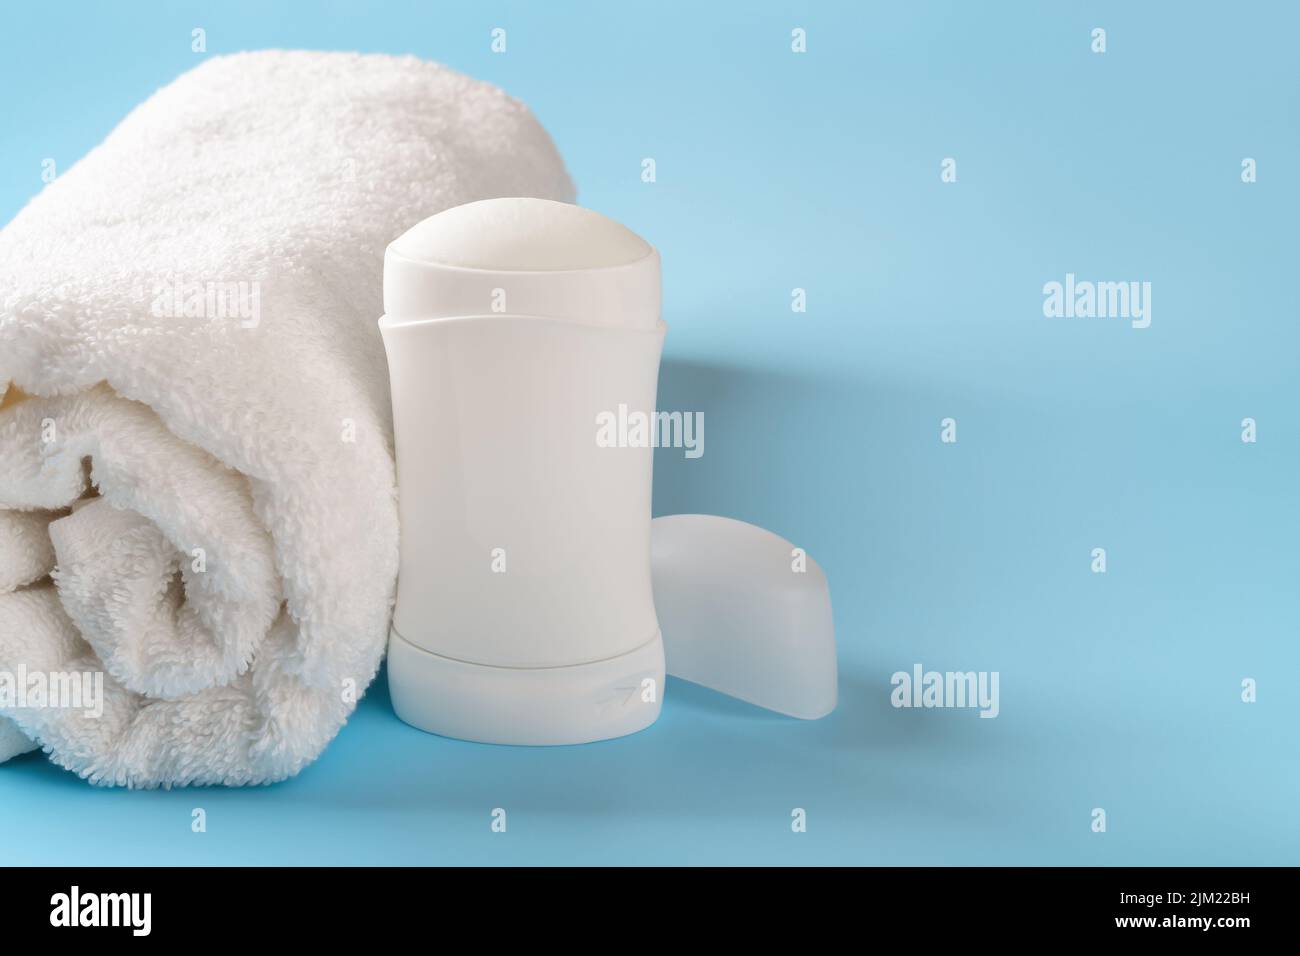 Solid antiperspirant deodorant and rolled bath towel on a blue background. Personal hygiene items, body care, toiletries concepts. Cosmetics, purity. Stock Photo